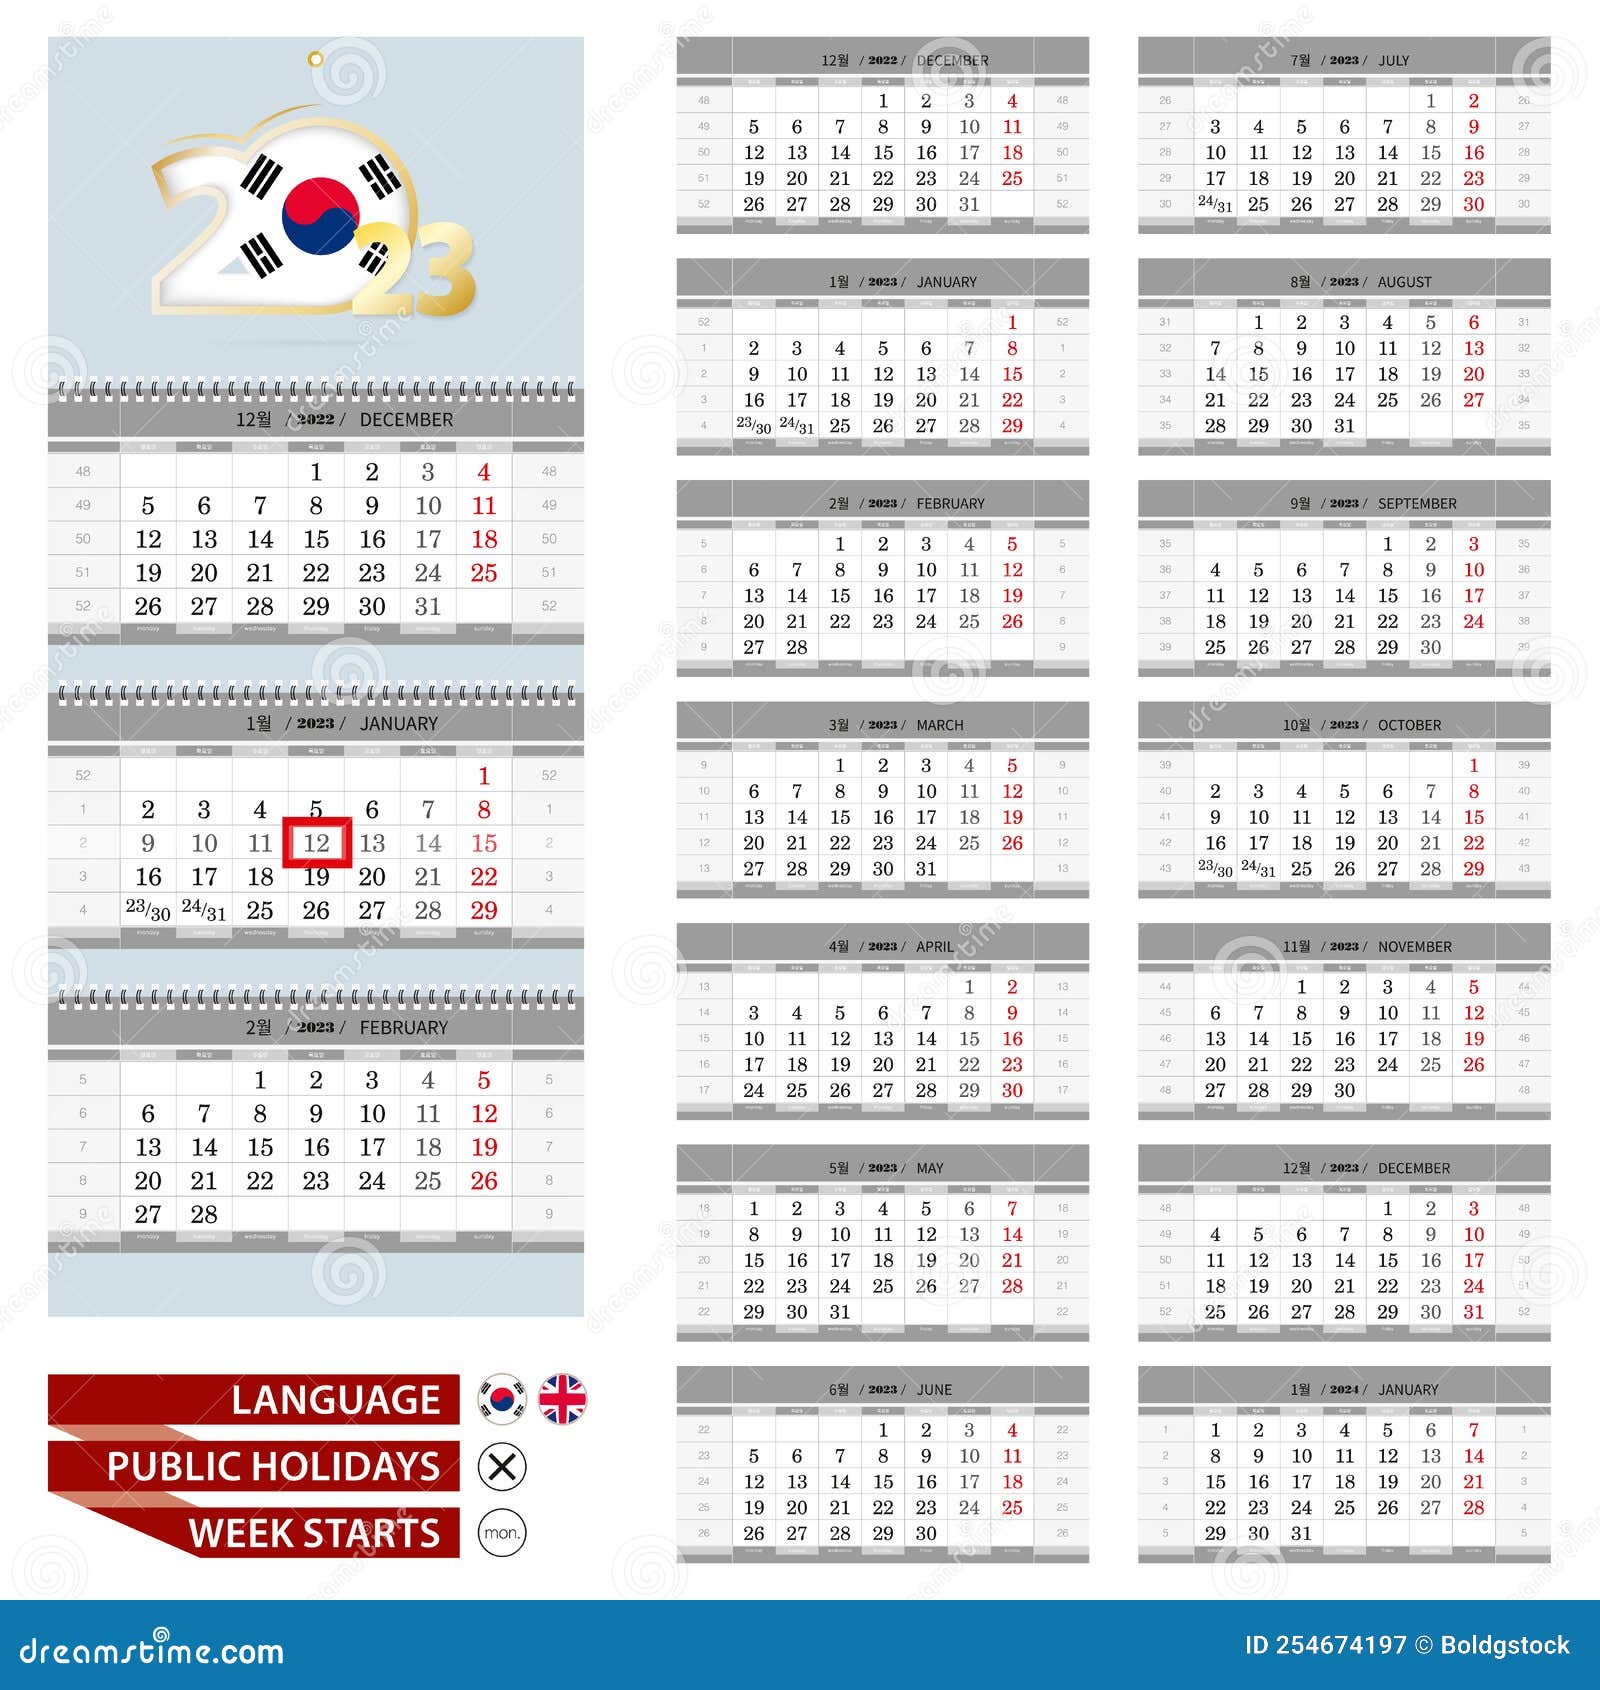 Korean and English Language Calendar for 2023 Year. Week Starts from